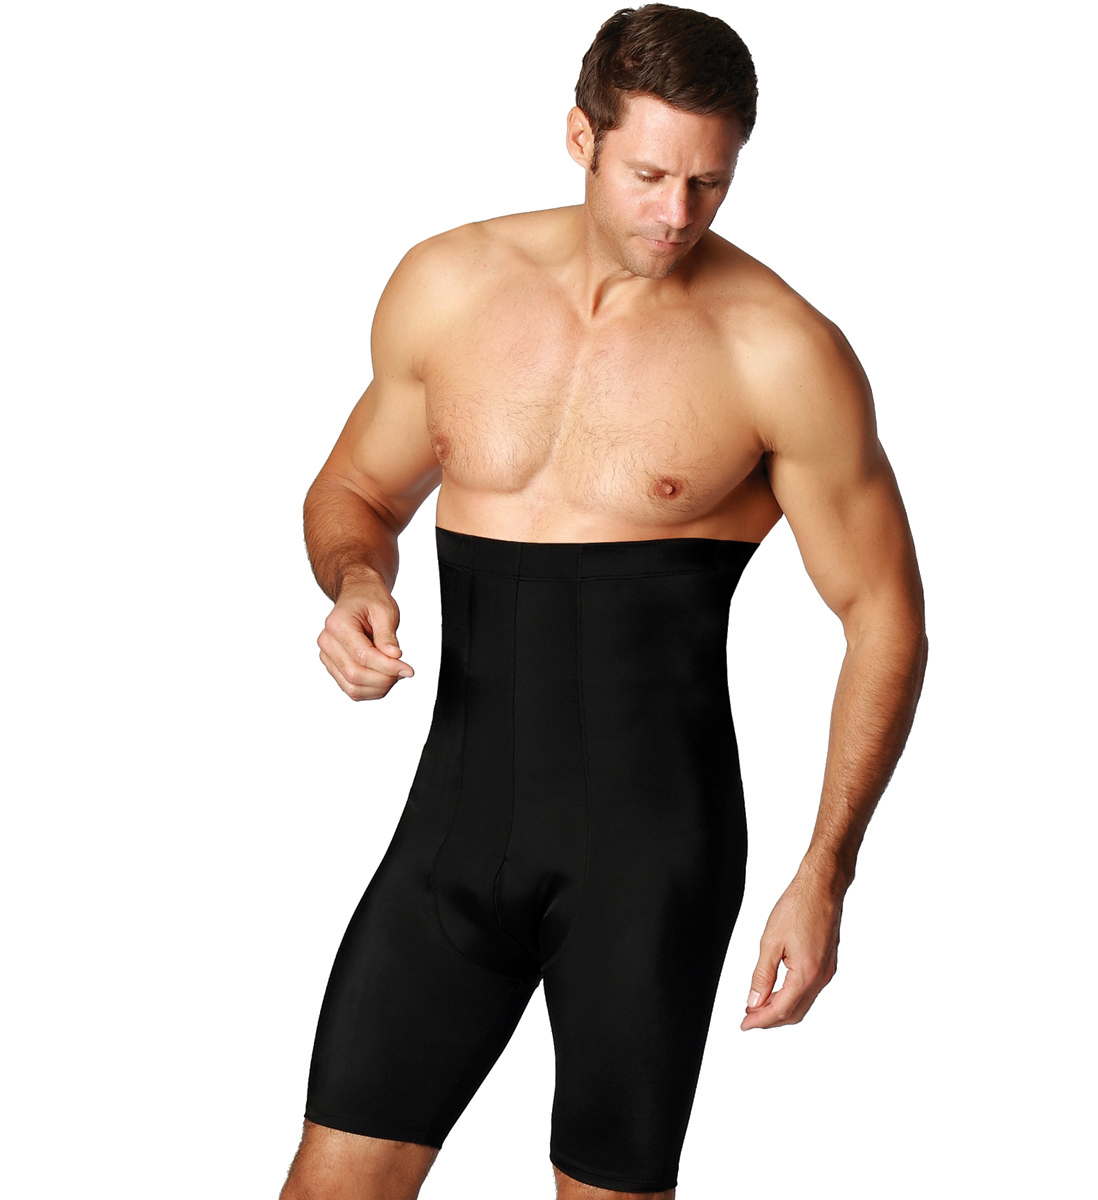 Insta Slim Compression undershorts for men, look up to 5 inches slimmer instantly!